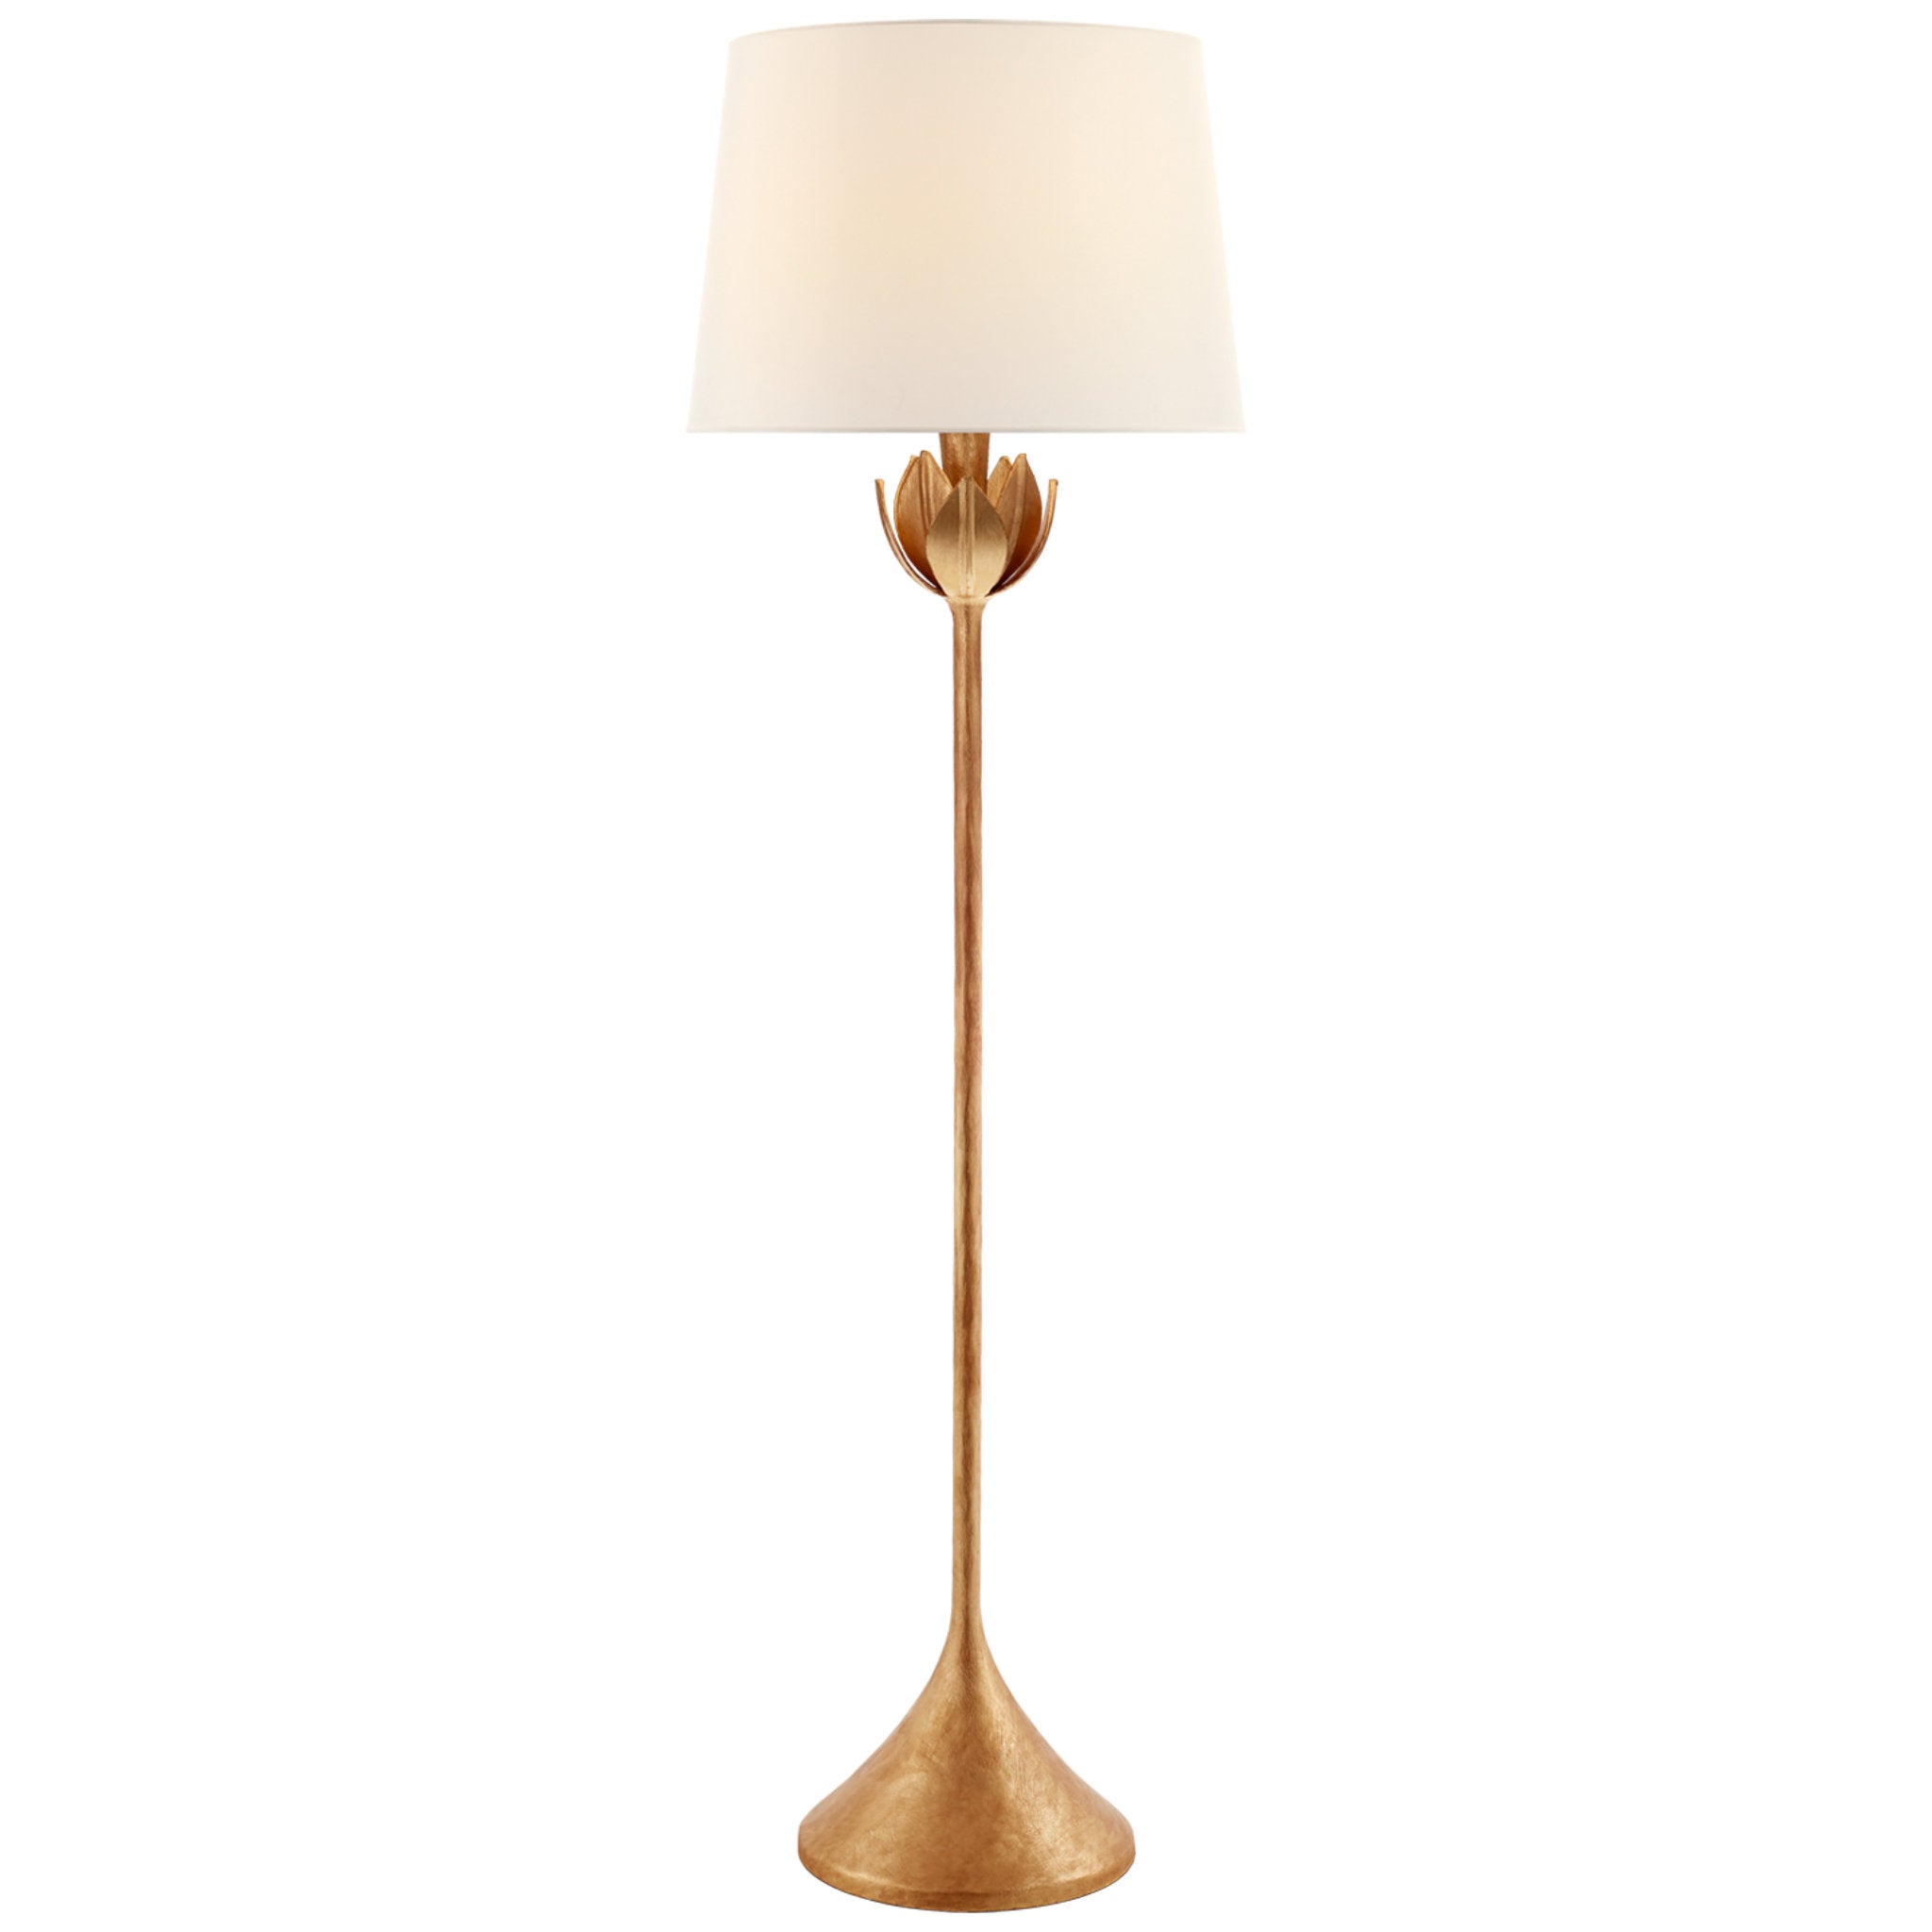 Julie Neill Alberto Large Floor Lamp in Antique Gold Leaf with Linen Shade